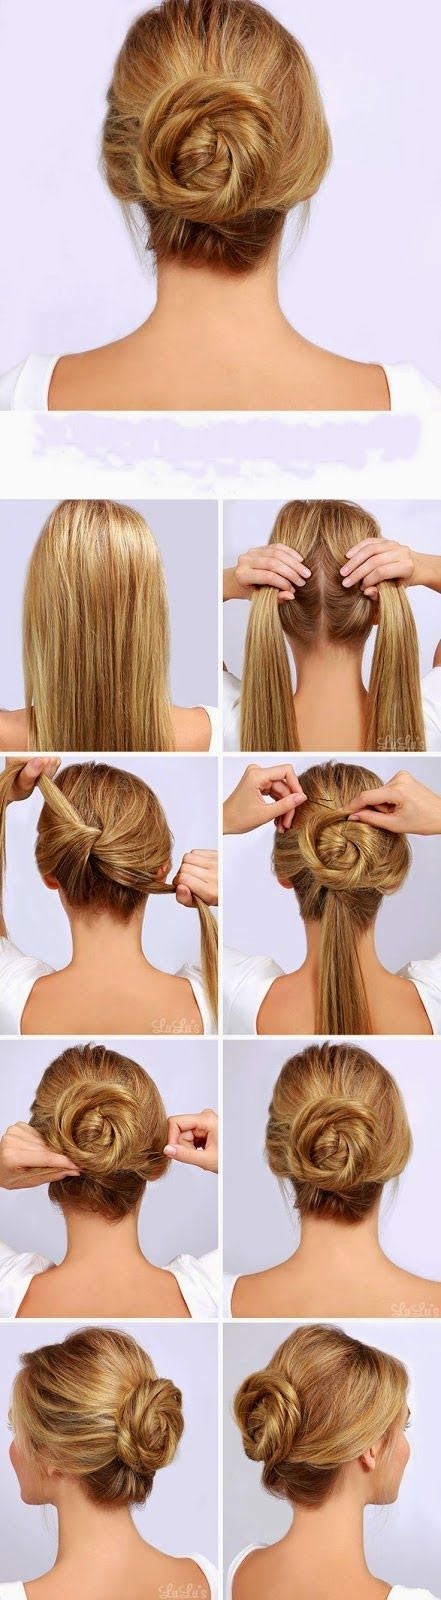 Easy but Gorgeous Hairstyles for Busy Mornings